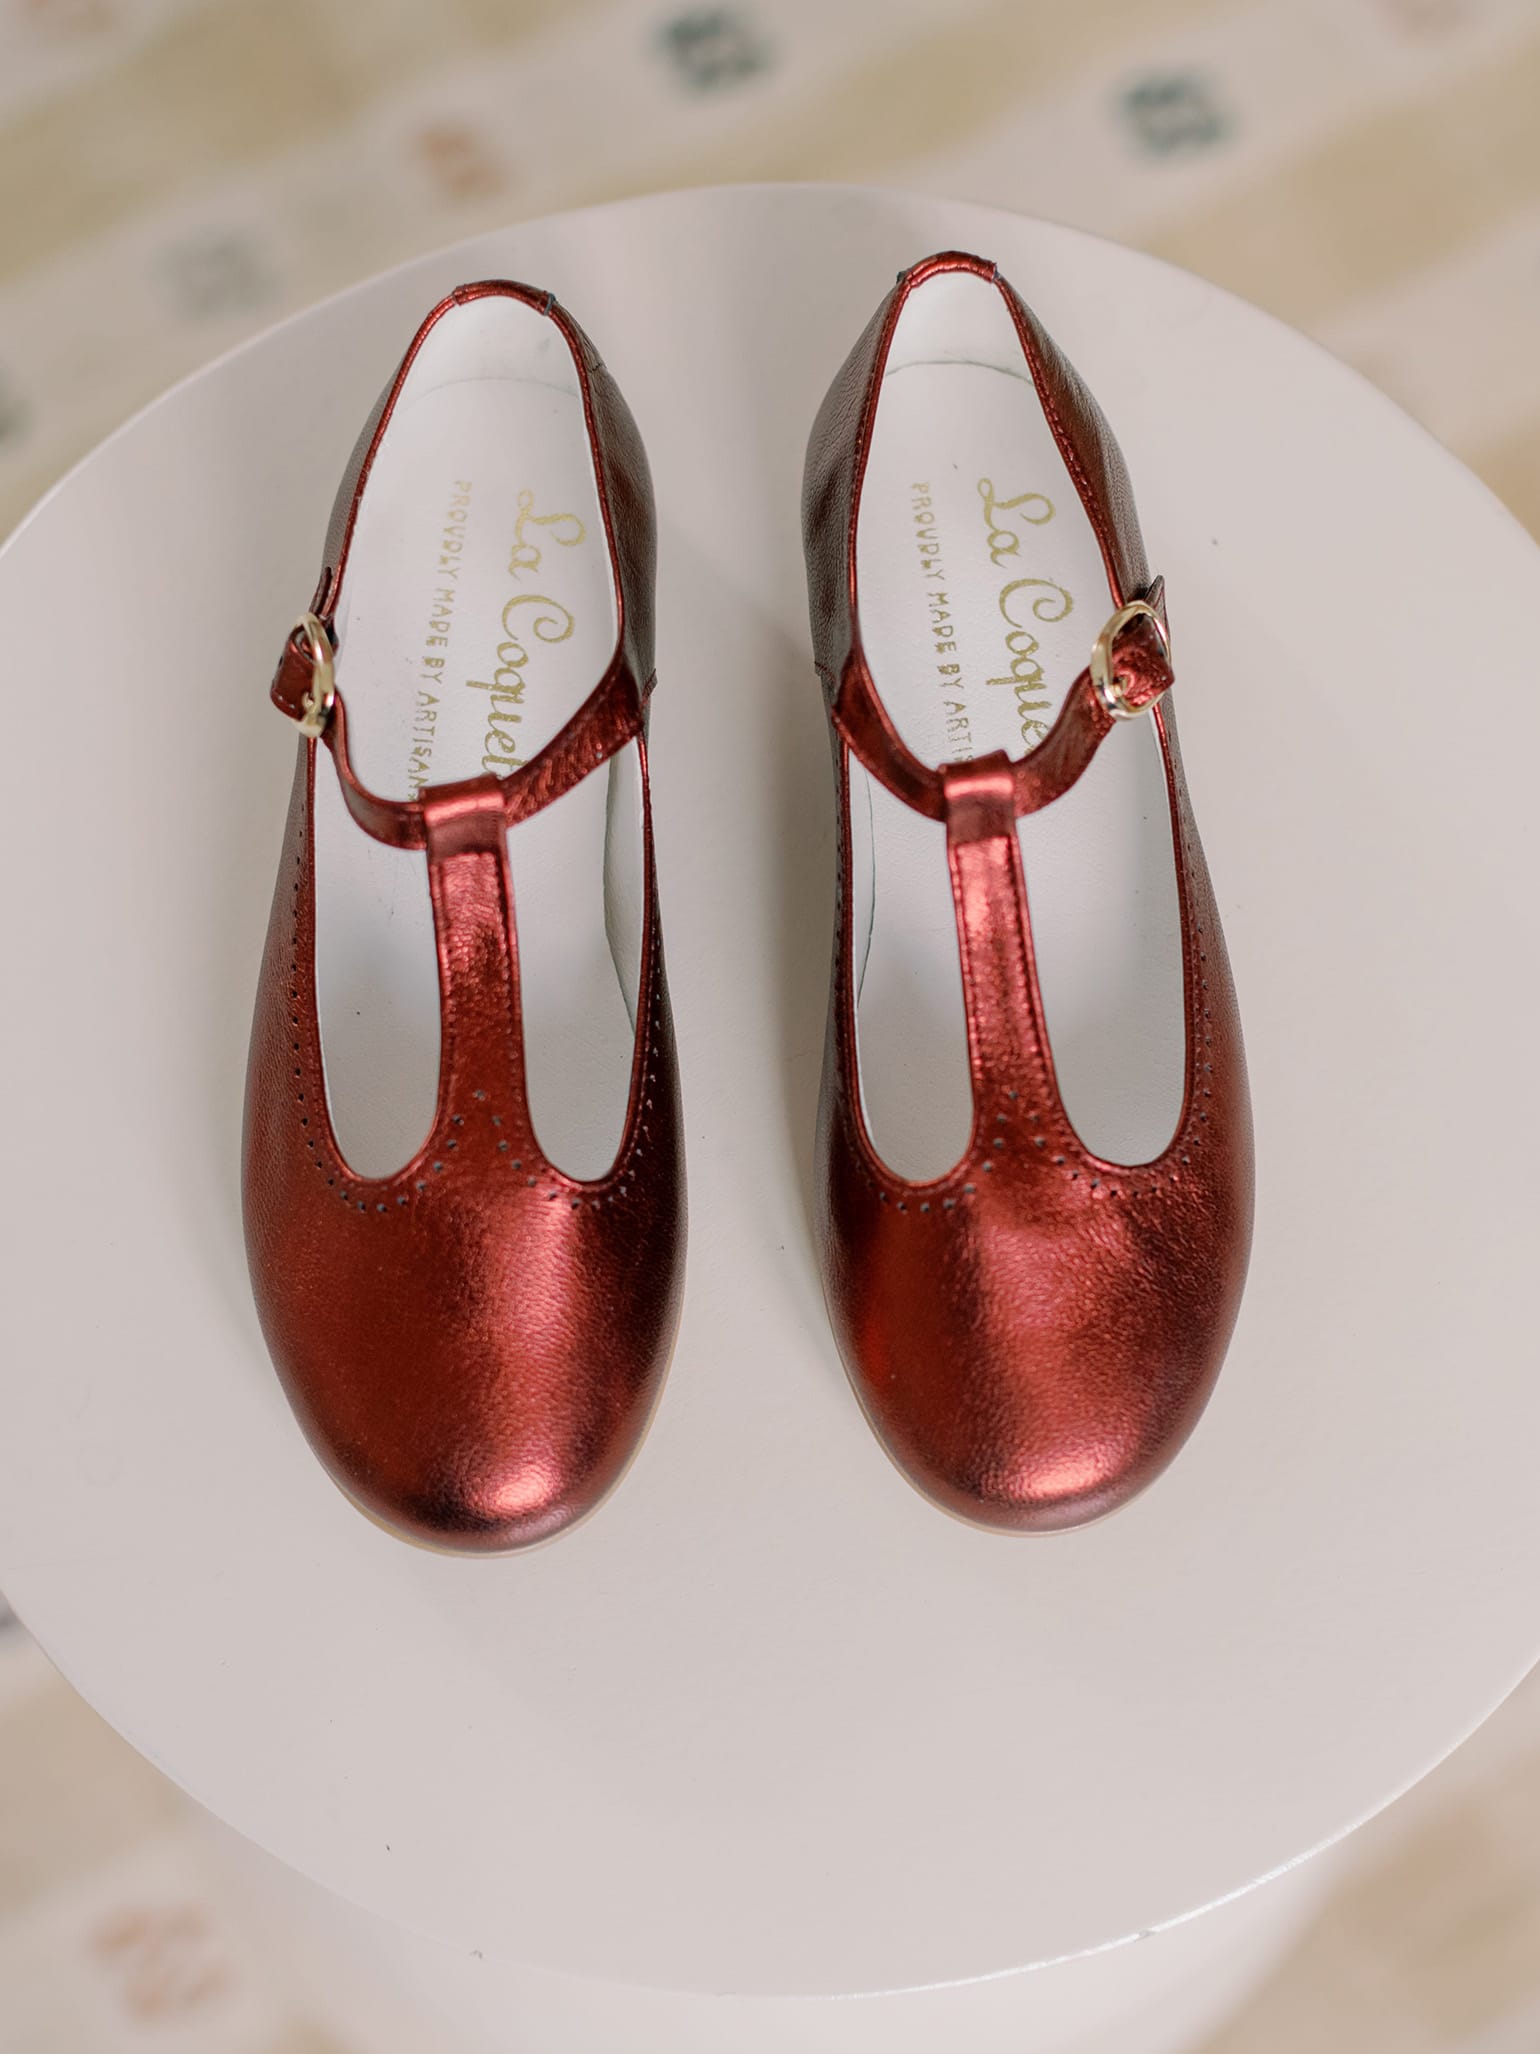 Red Metallic Leather Girl T-Bar Shoes